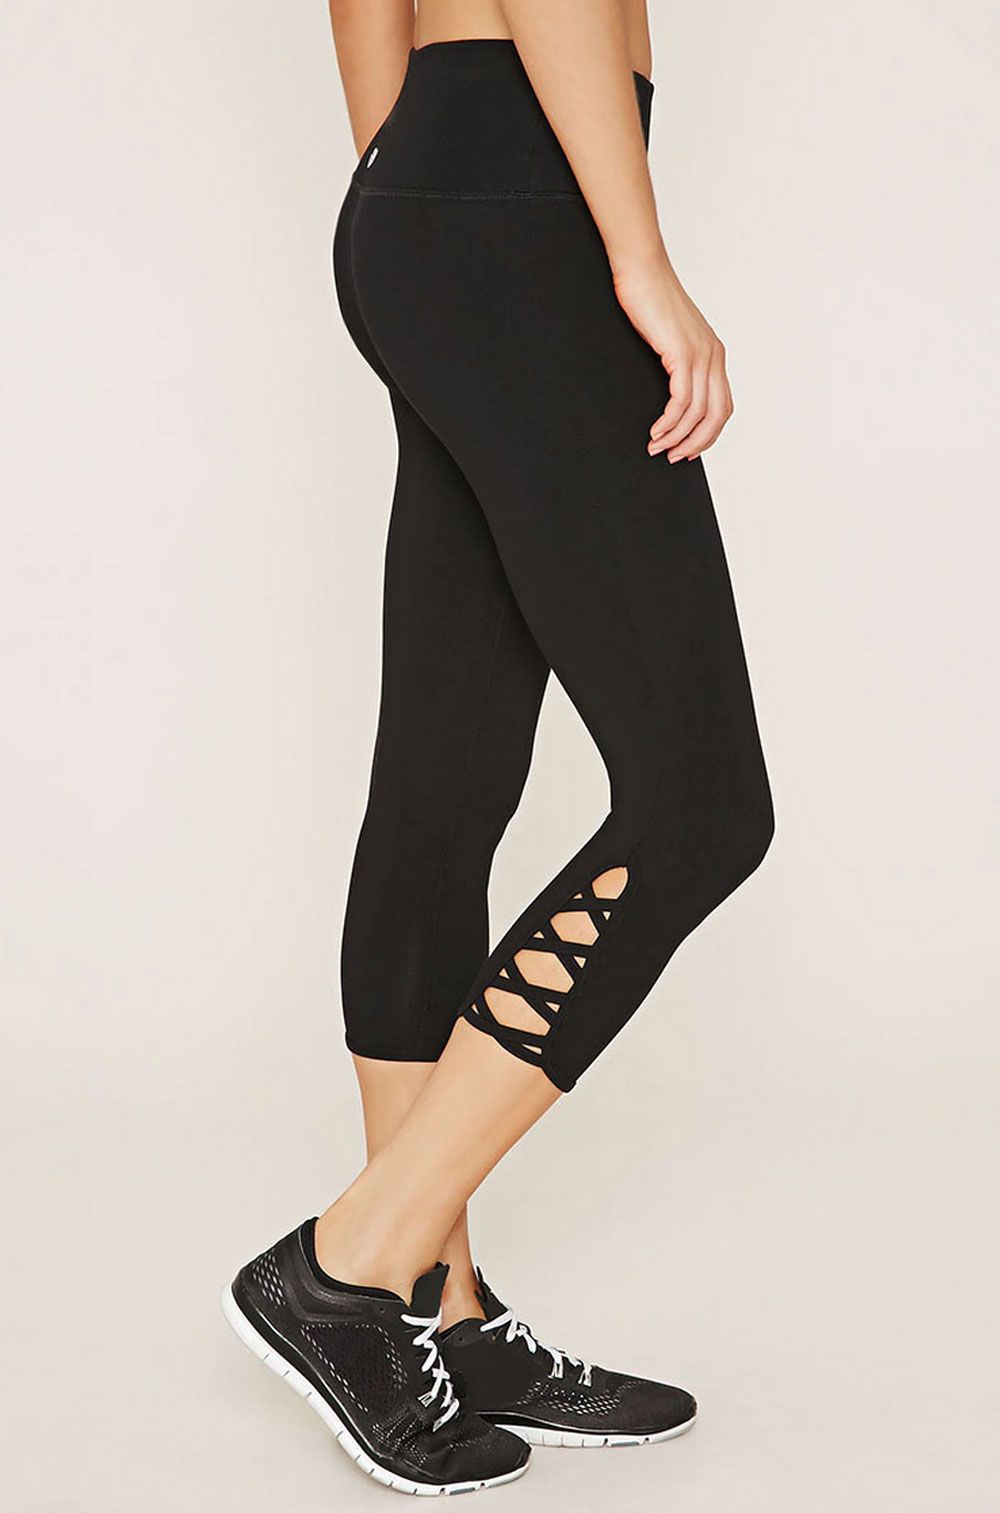 Prisma Shimmer Leggings - Sparkling Style for Every Occasion